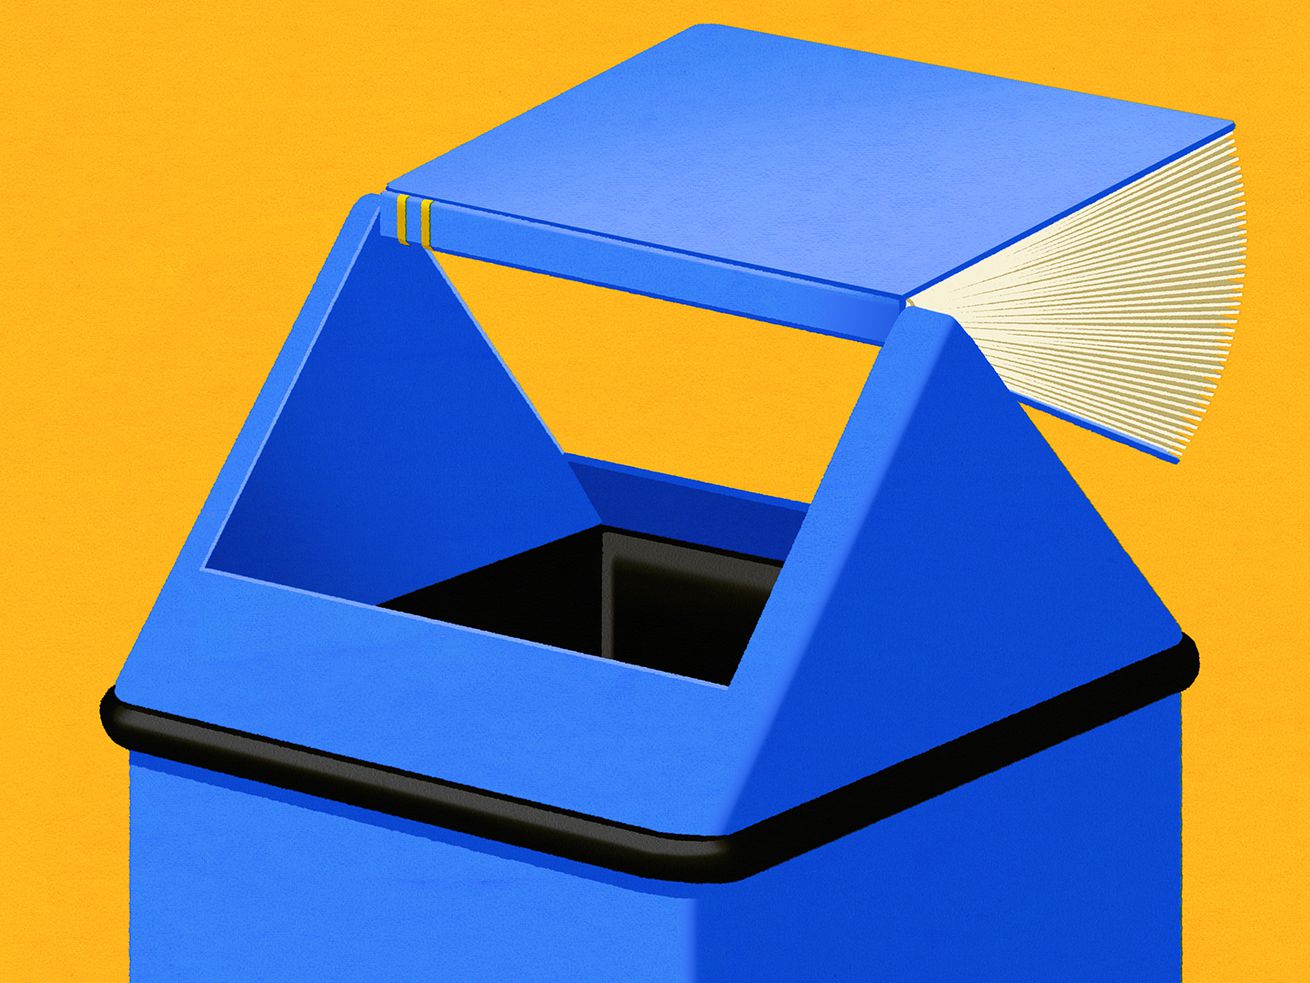 An illustration of a blue garbage can stands against a yellow background. The flip lid of the garbage can is swinging to the right, and we can see that it’s a book.